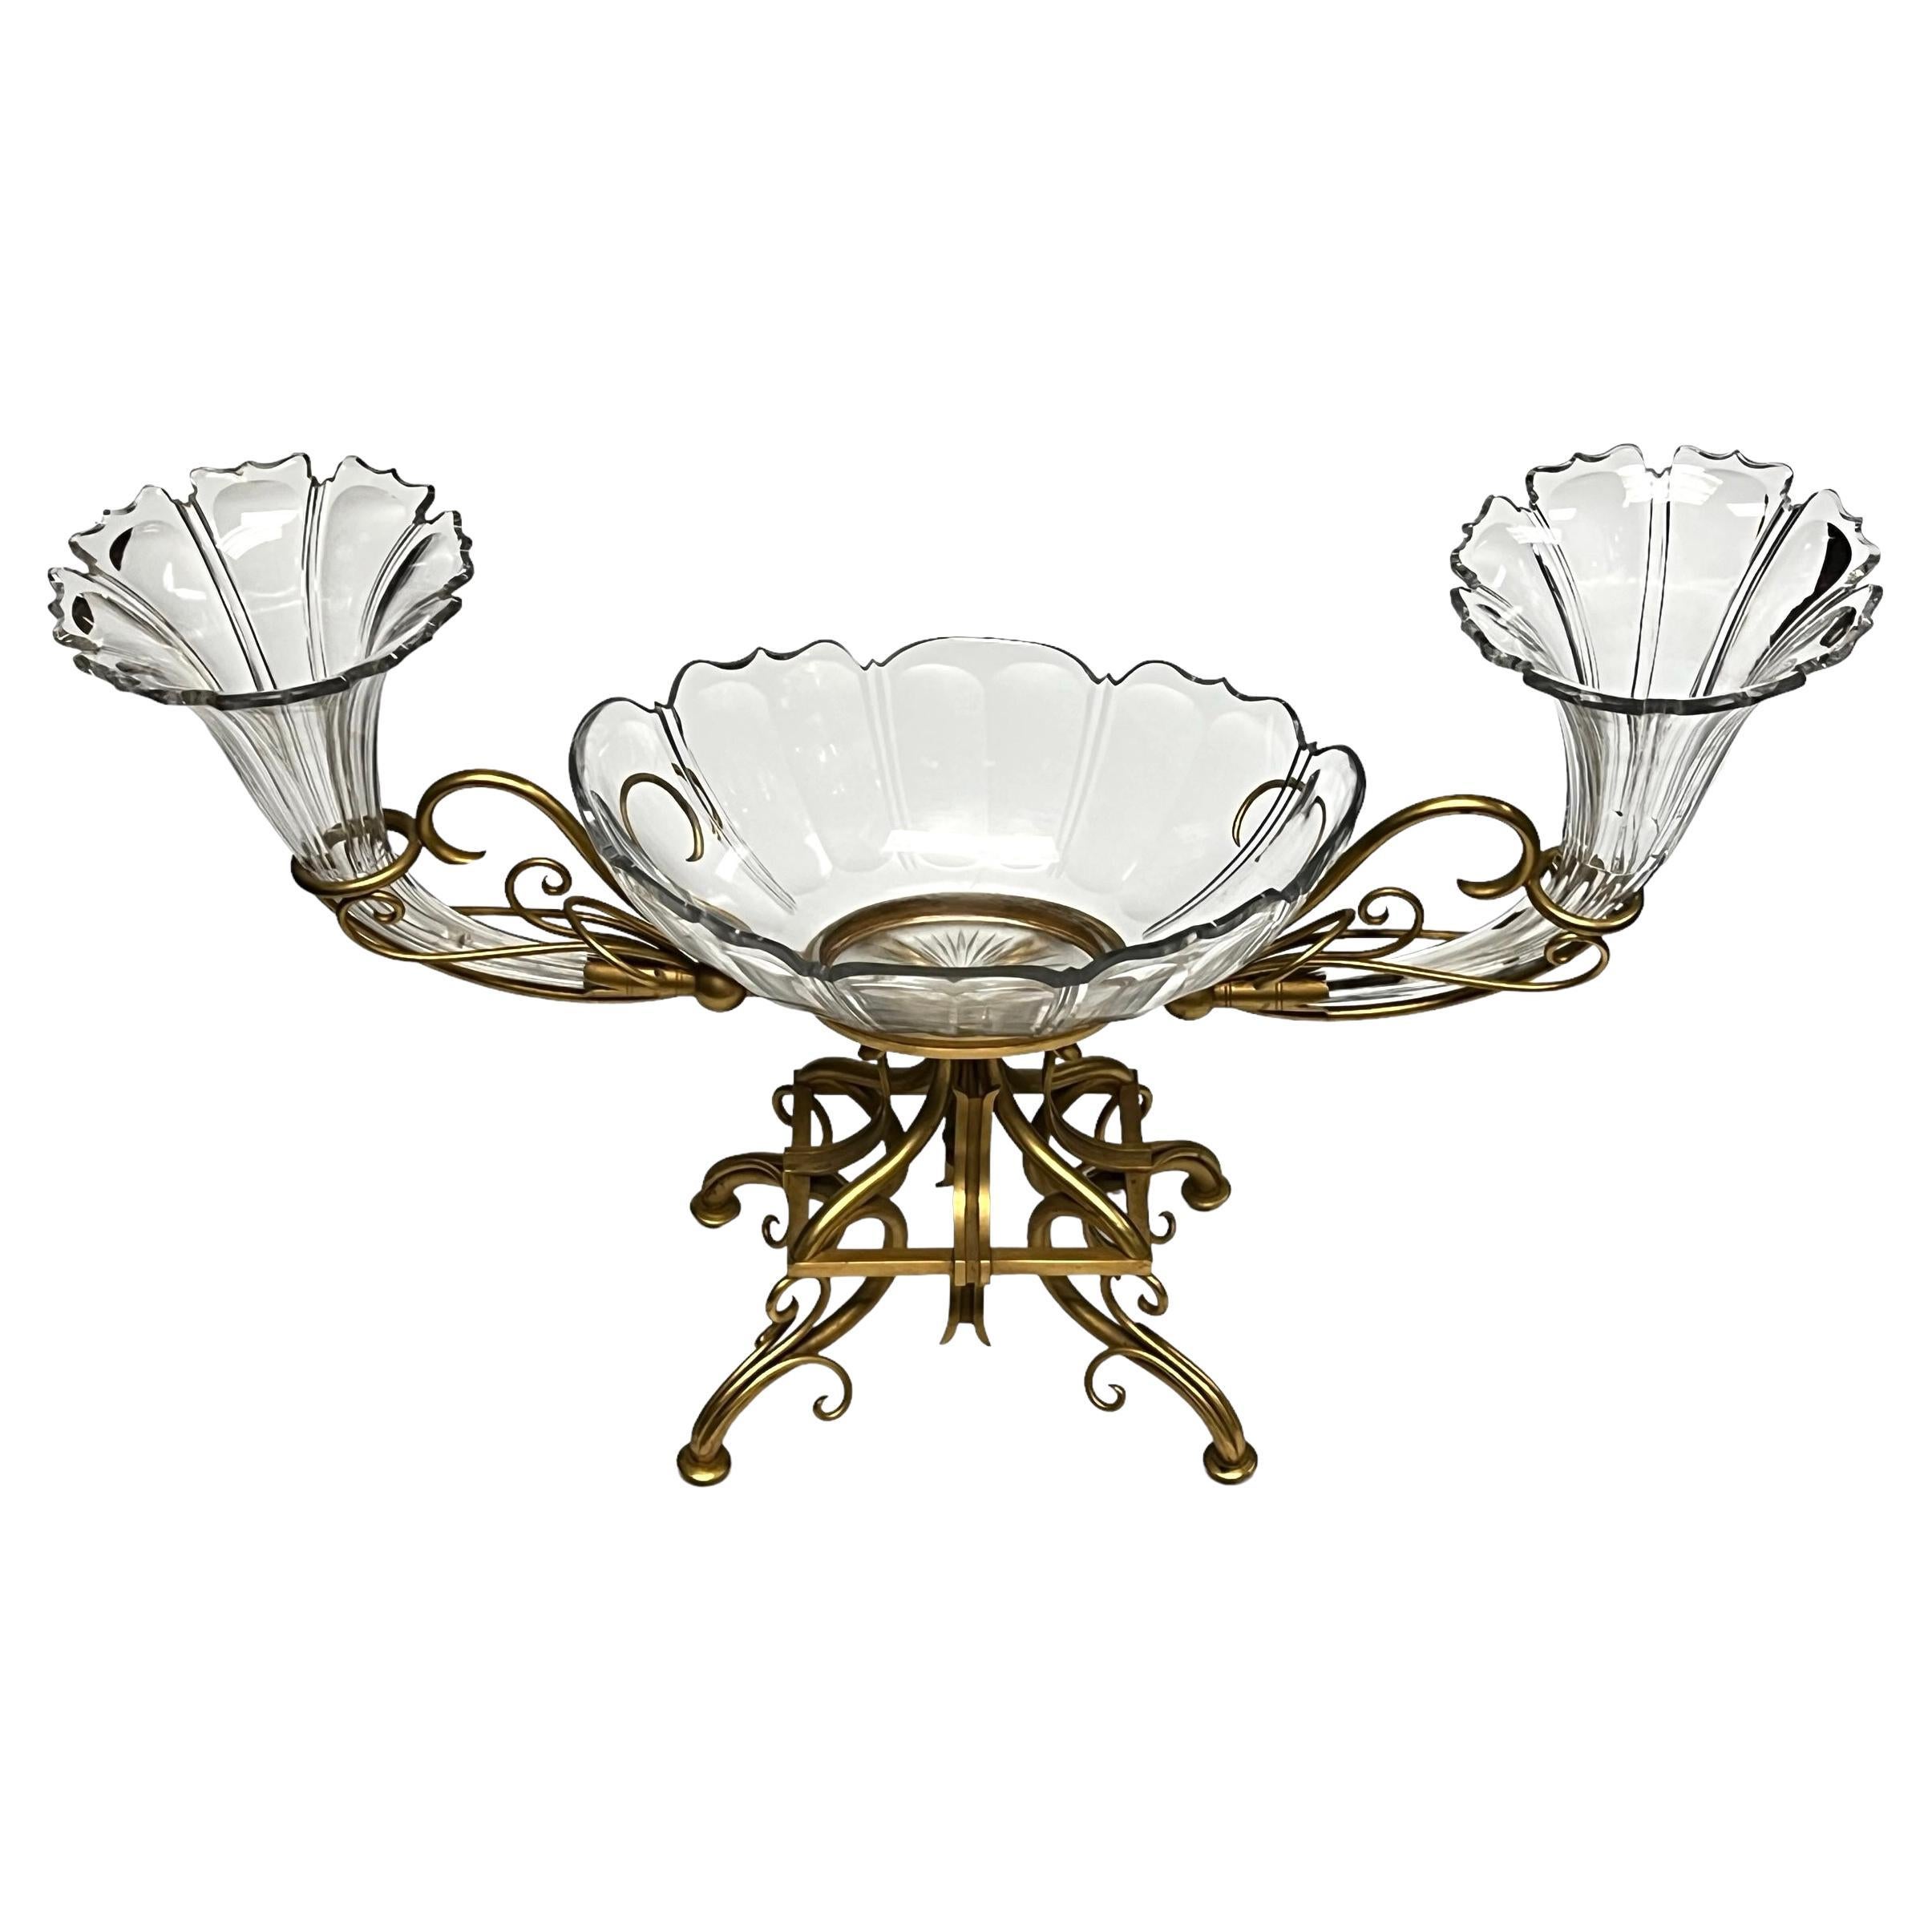 Very Large Bronze and Crystal Centerpiece Attributed to Baccarat